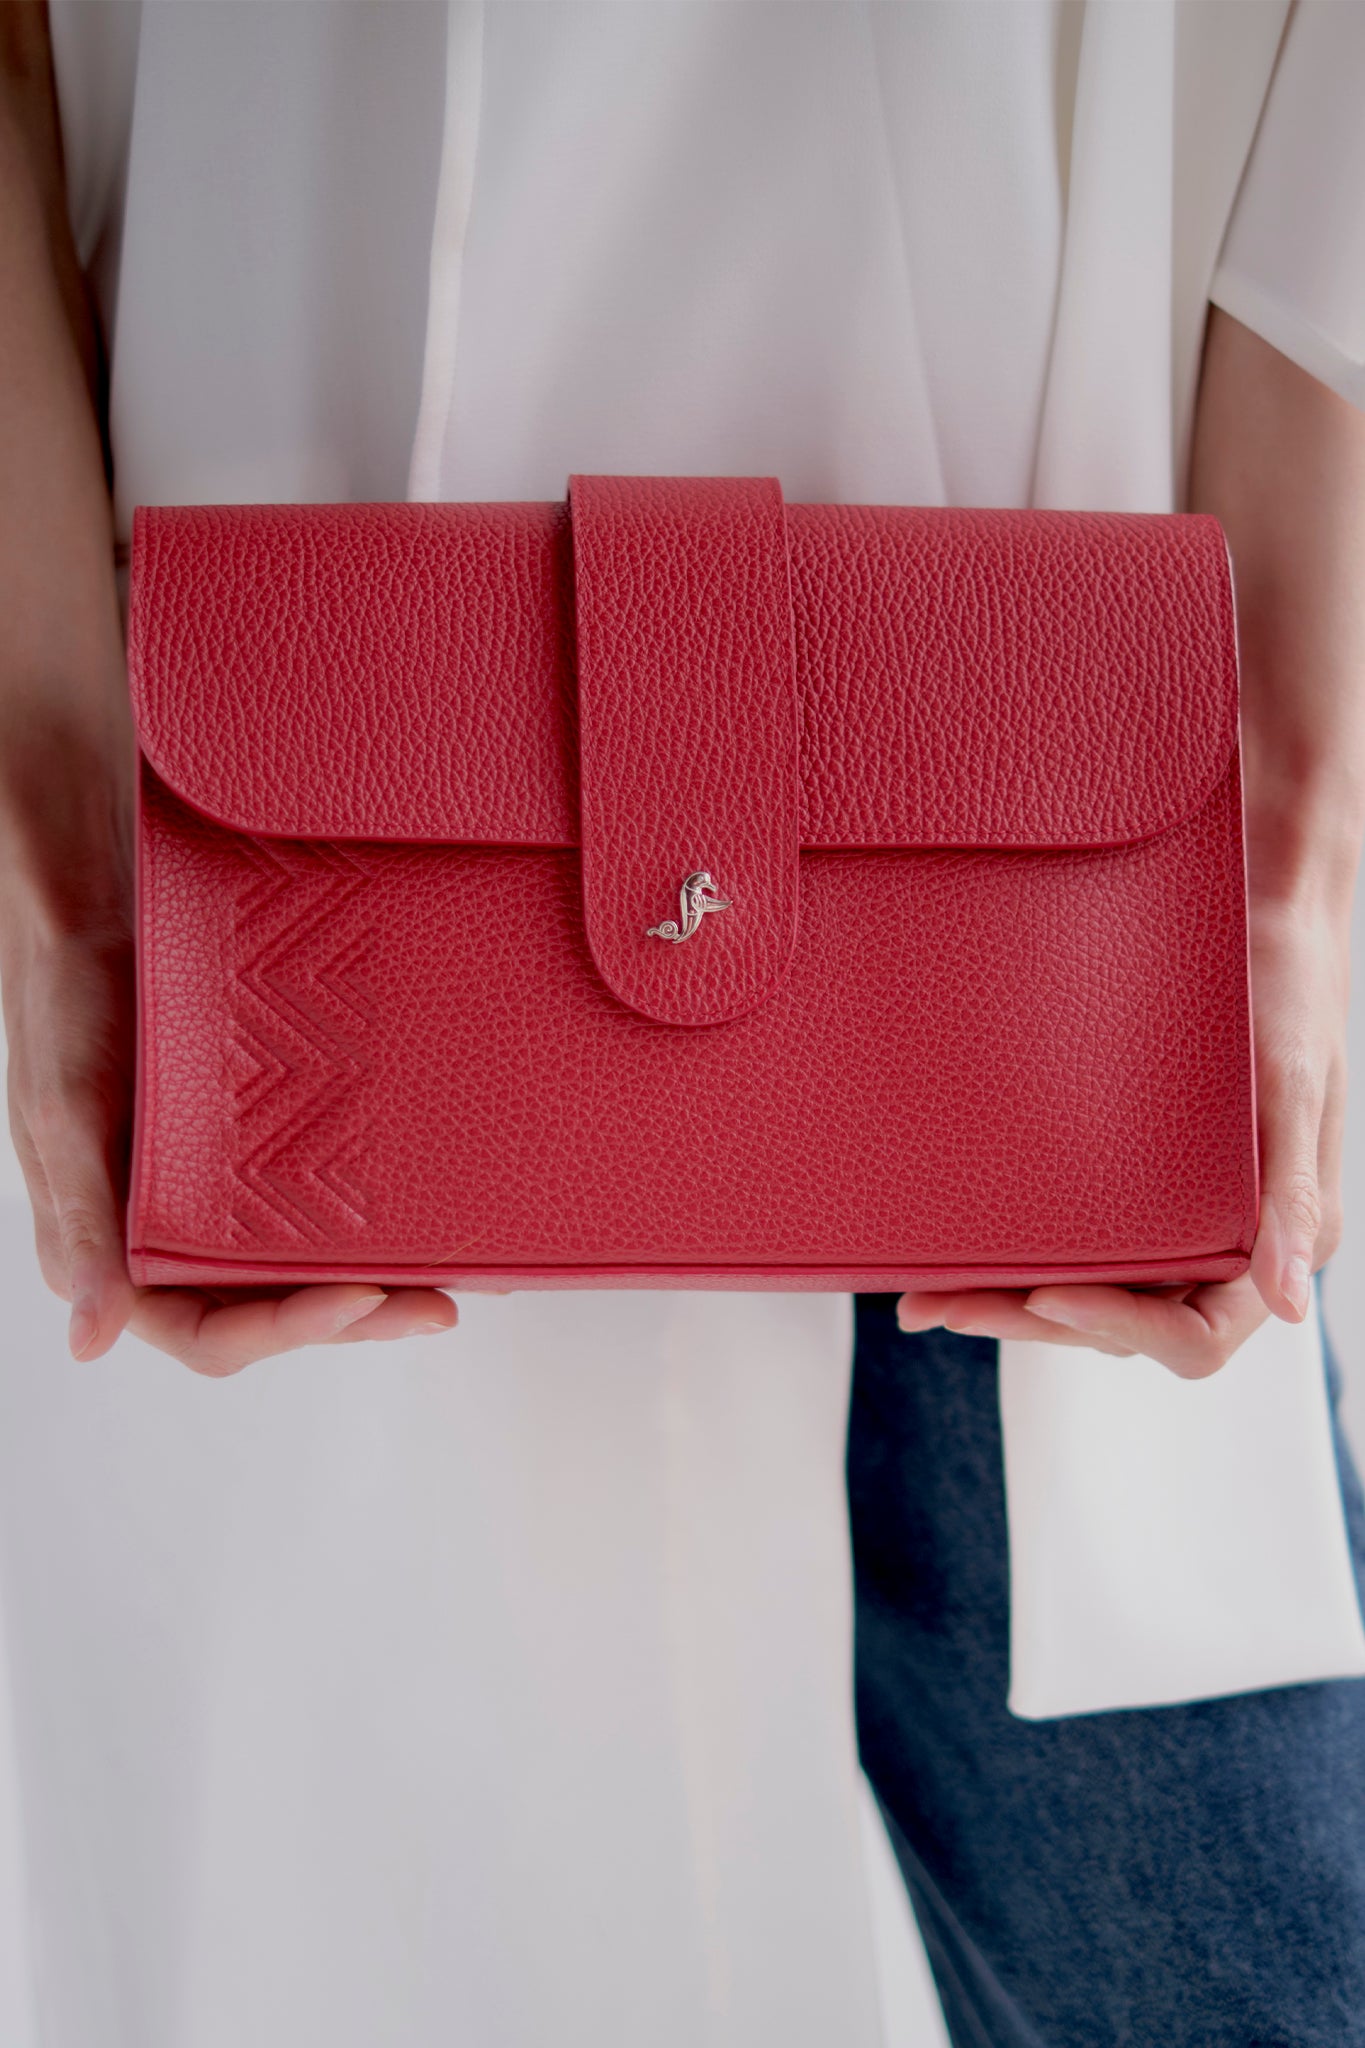 Kars leather clutch in red